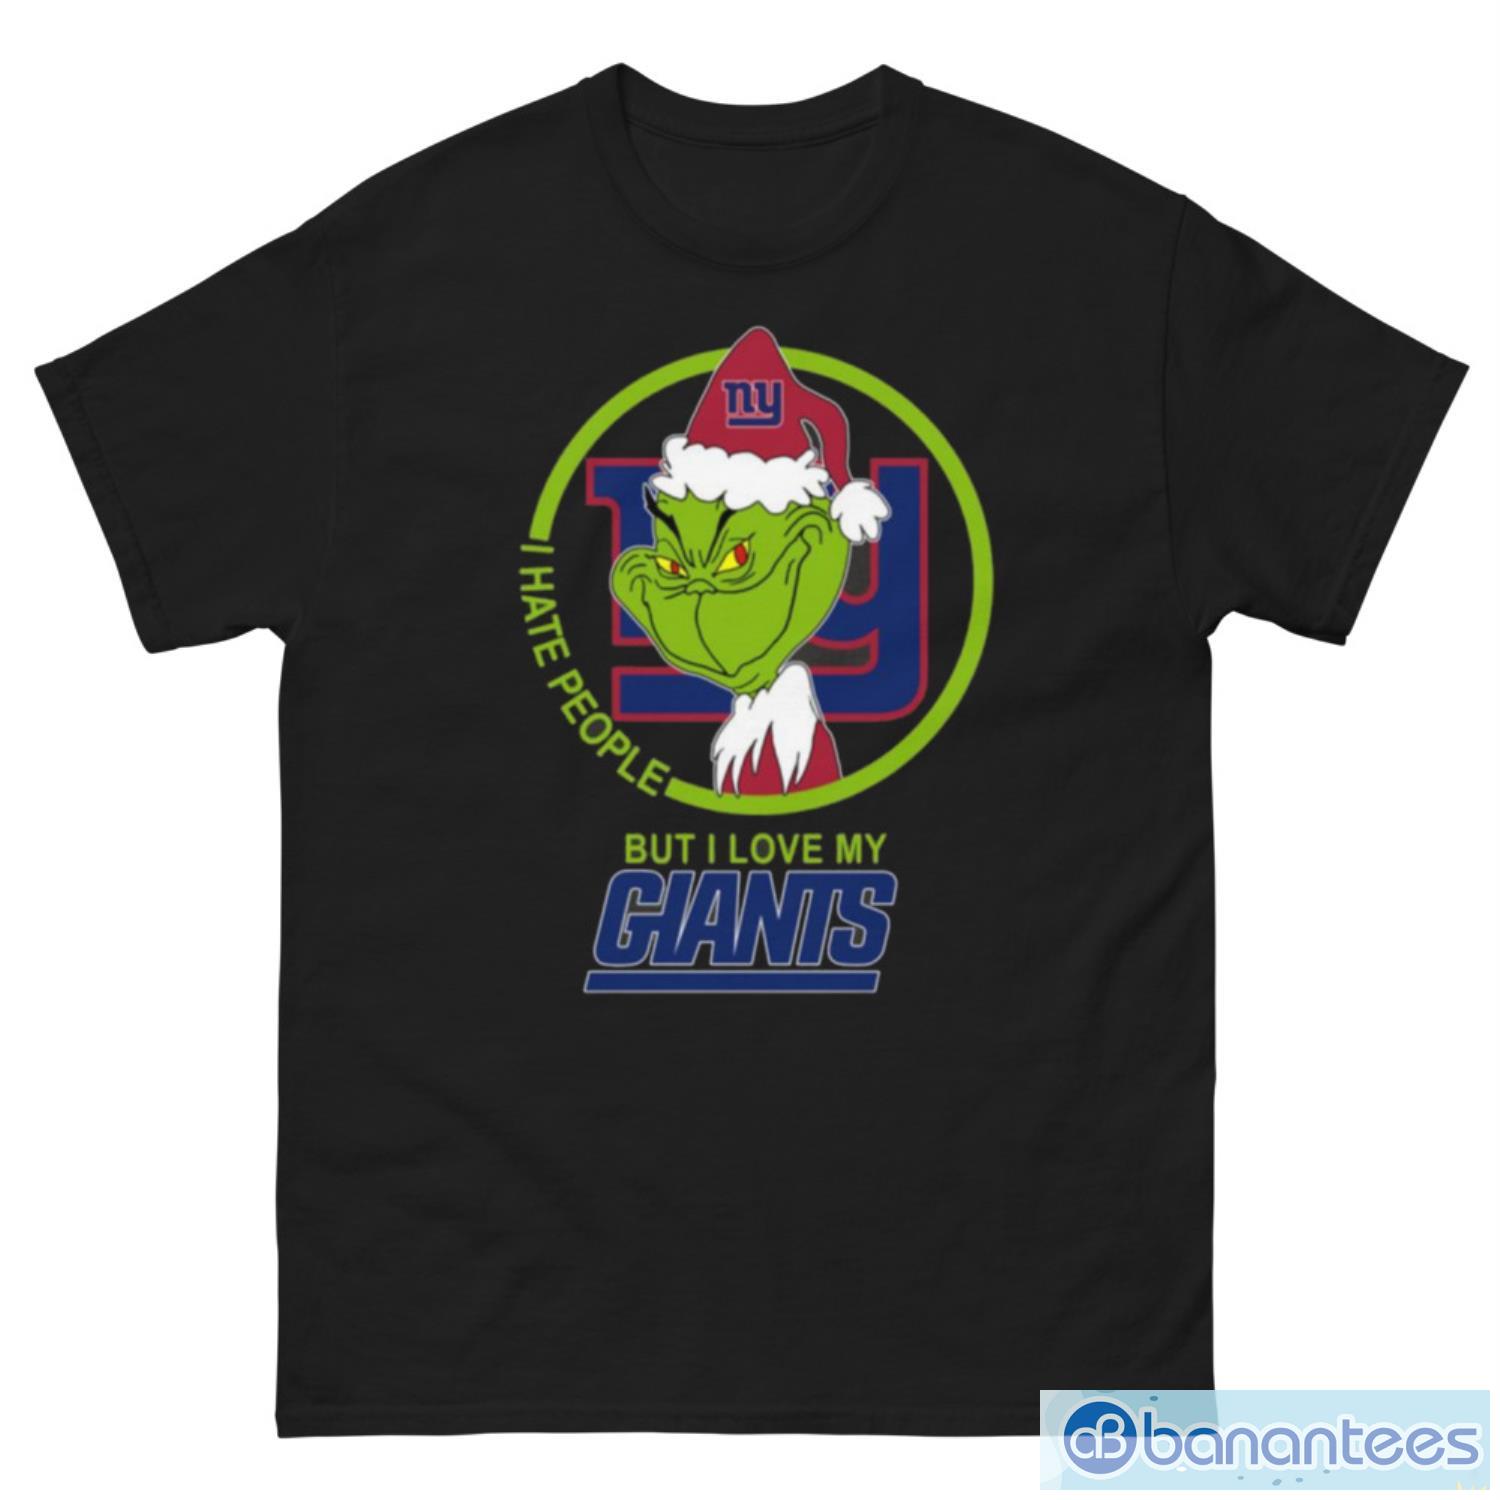 New York Giants NFL Christmas Grinch I Hate People But I Love My Favorite Football Team T Shirt - G500 Men’s Classic Tee